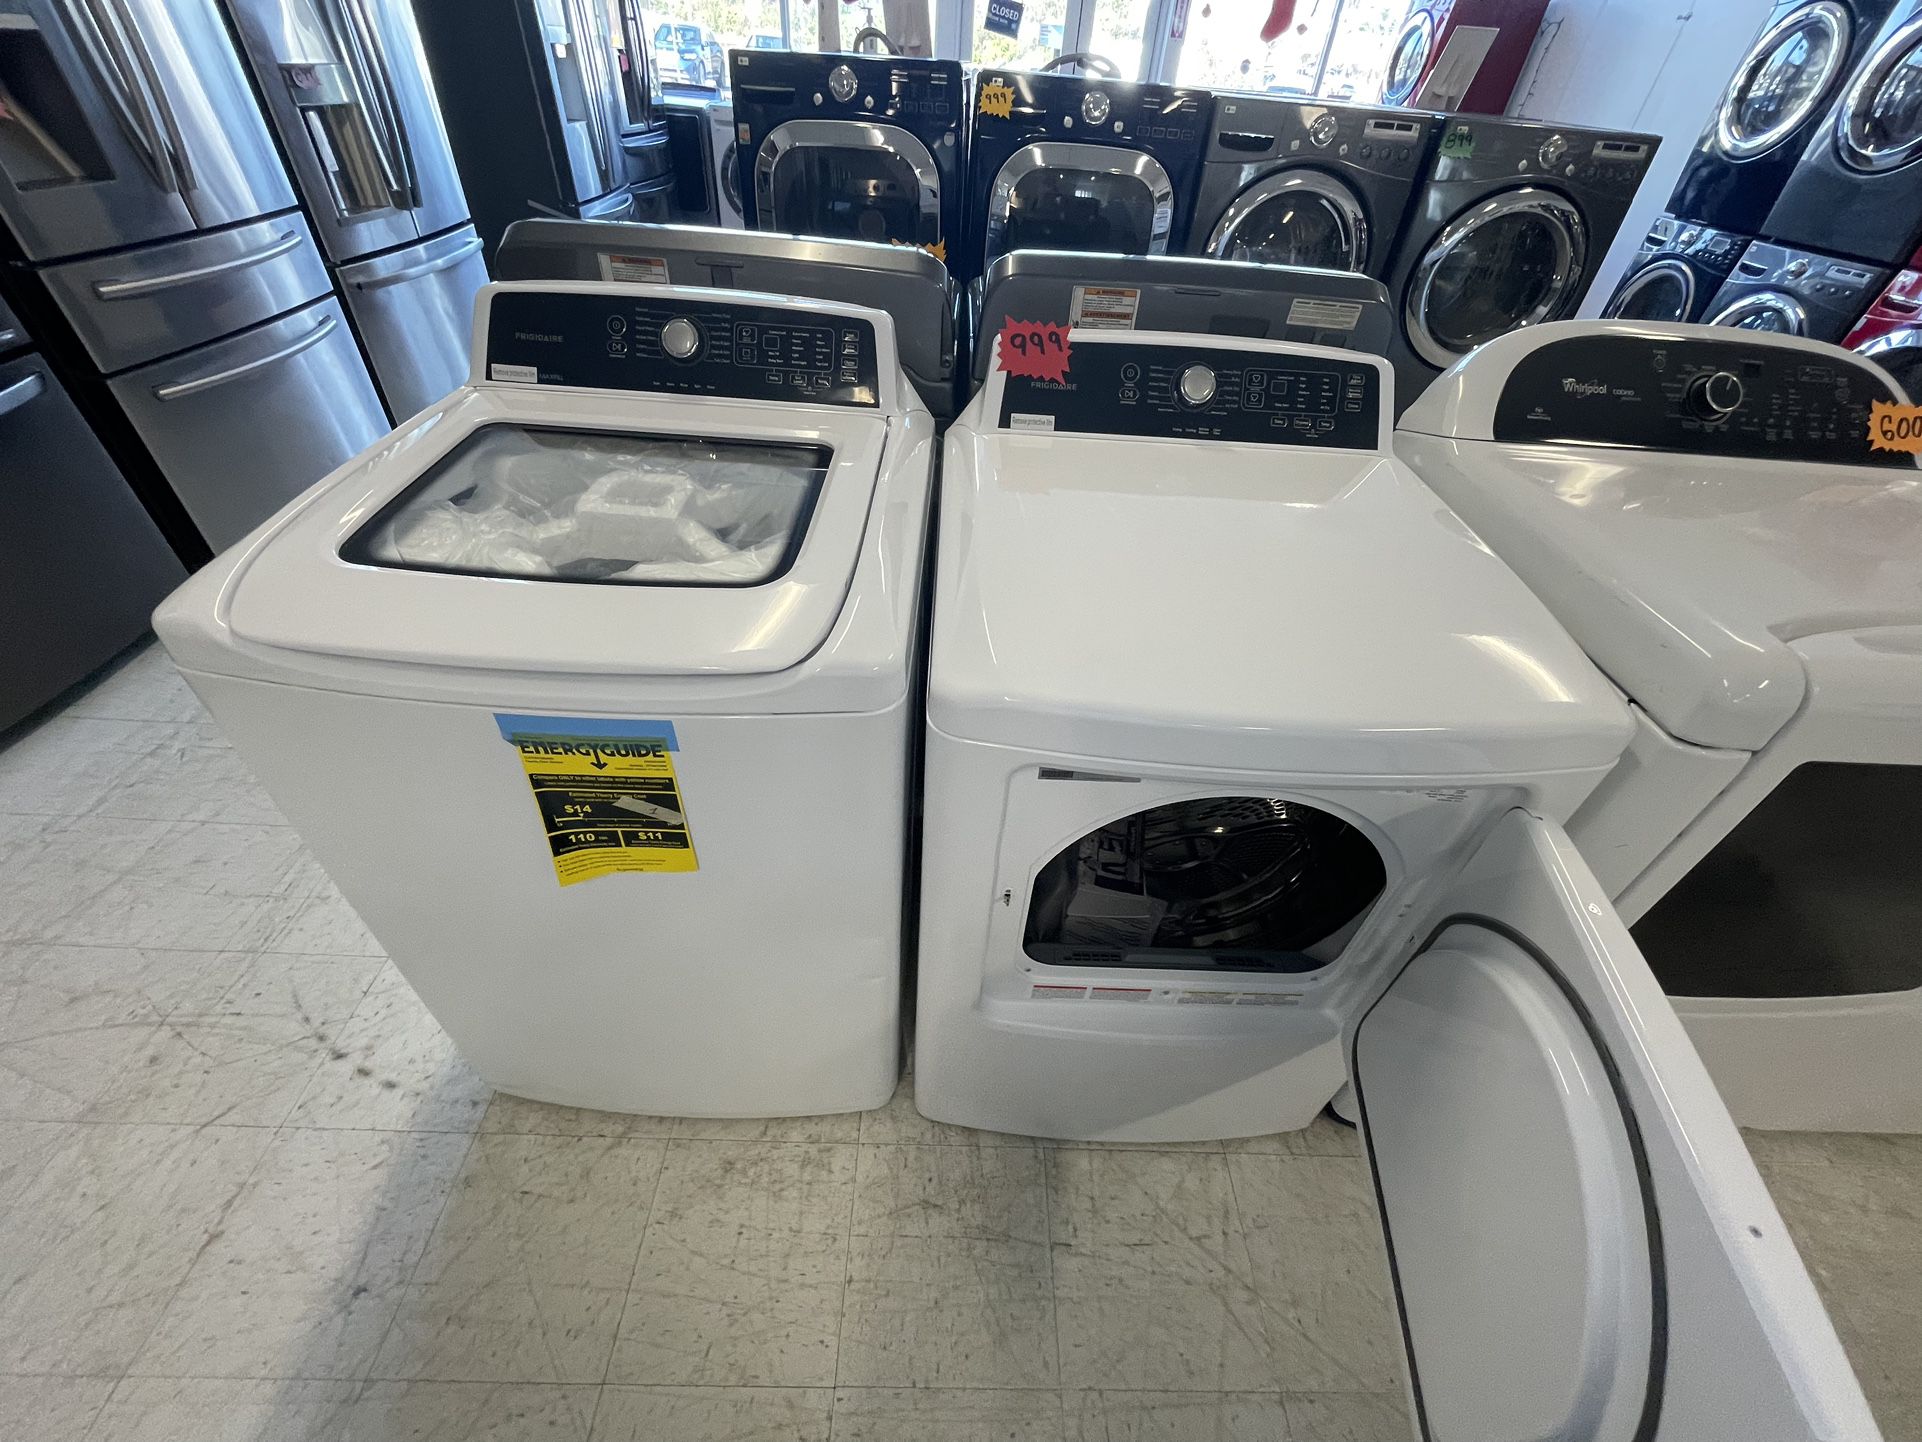 Frigidaire Tap Load Washer And Electric Dryer Set New Scratch And Dent With 6months Warranty 